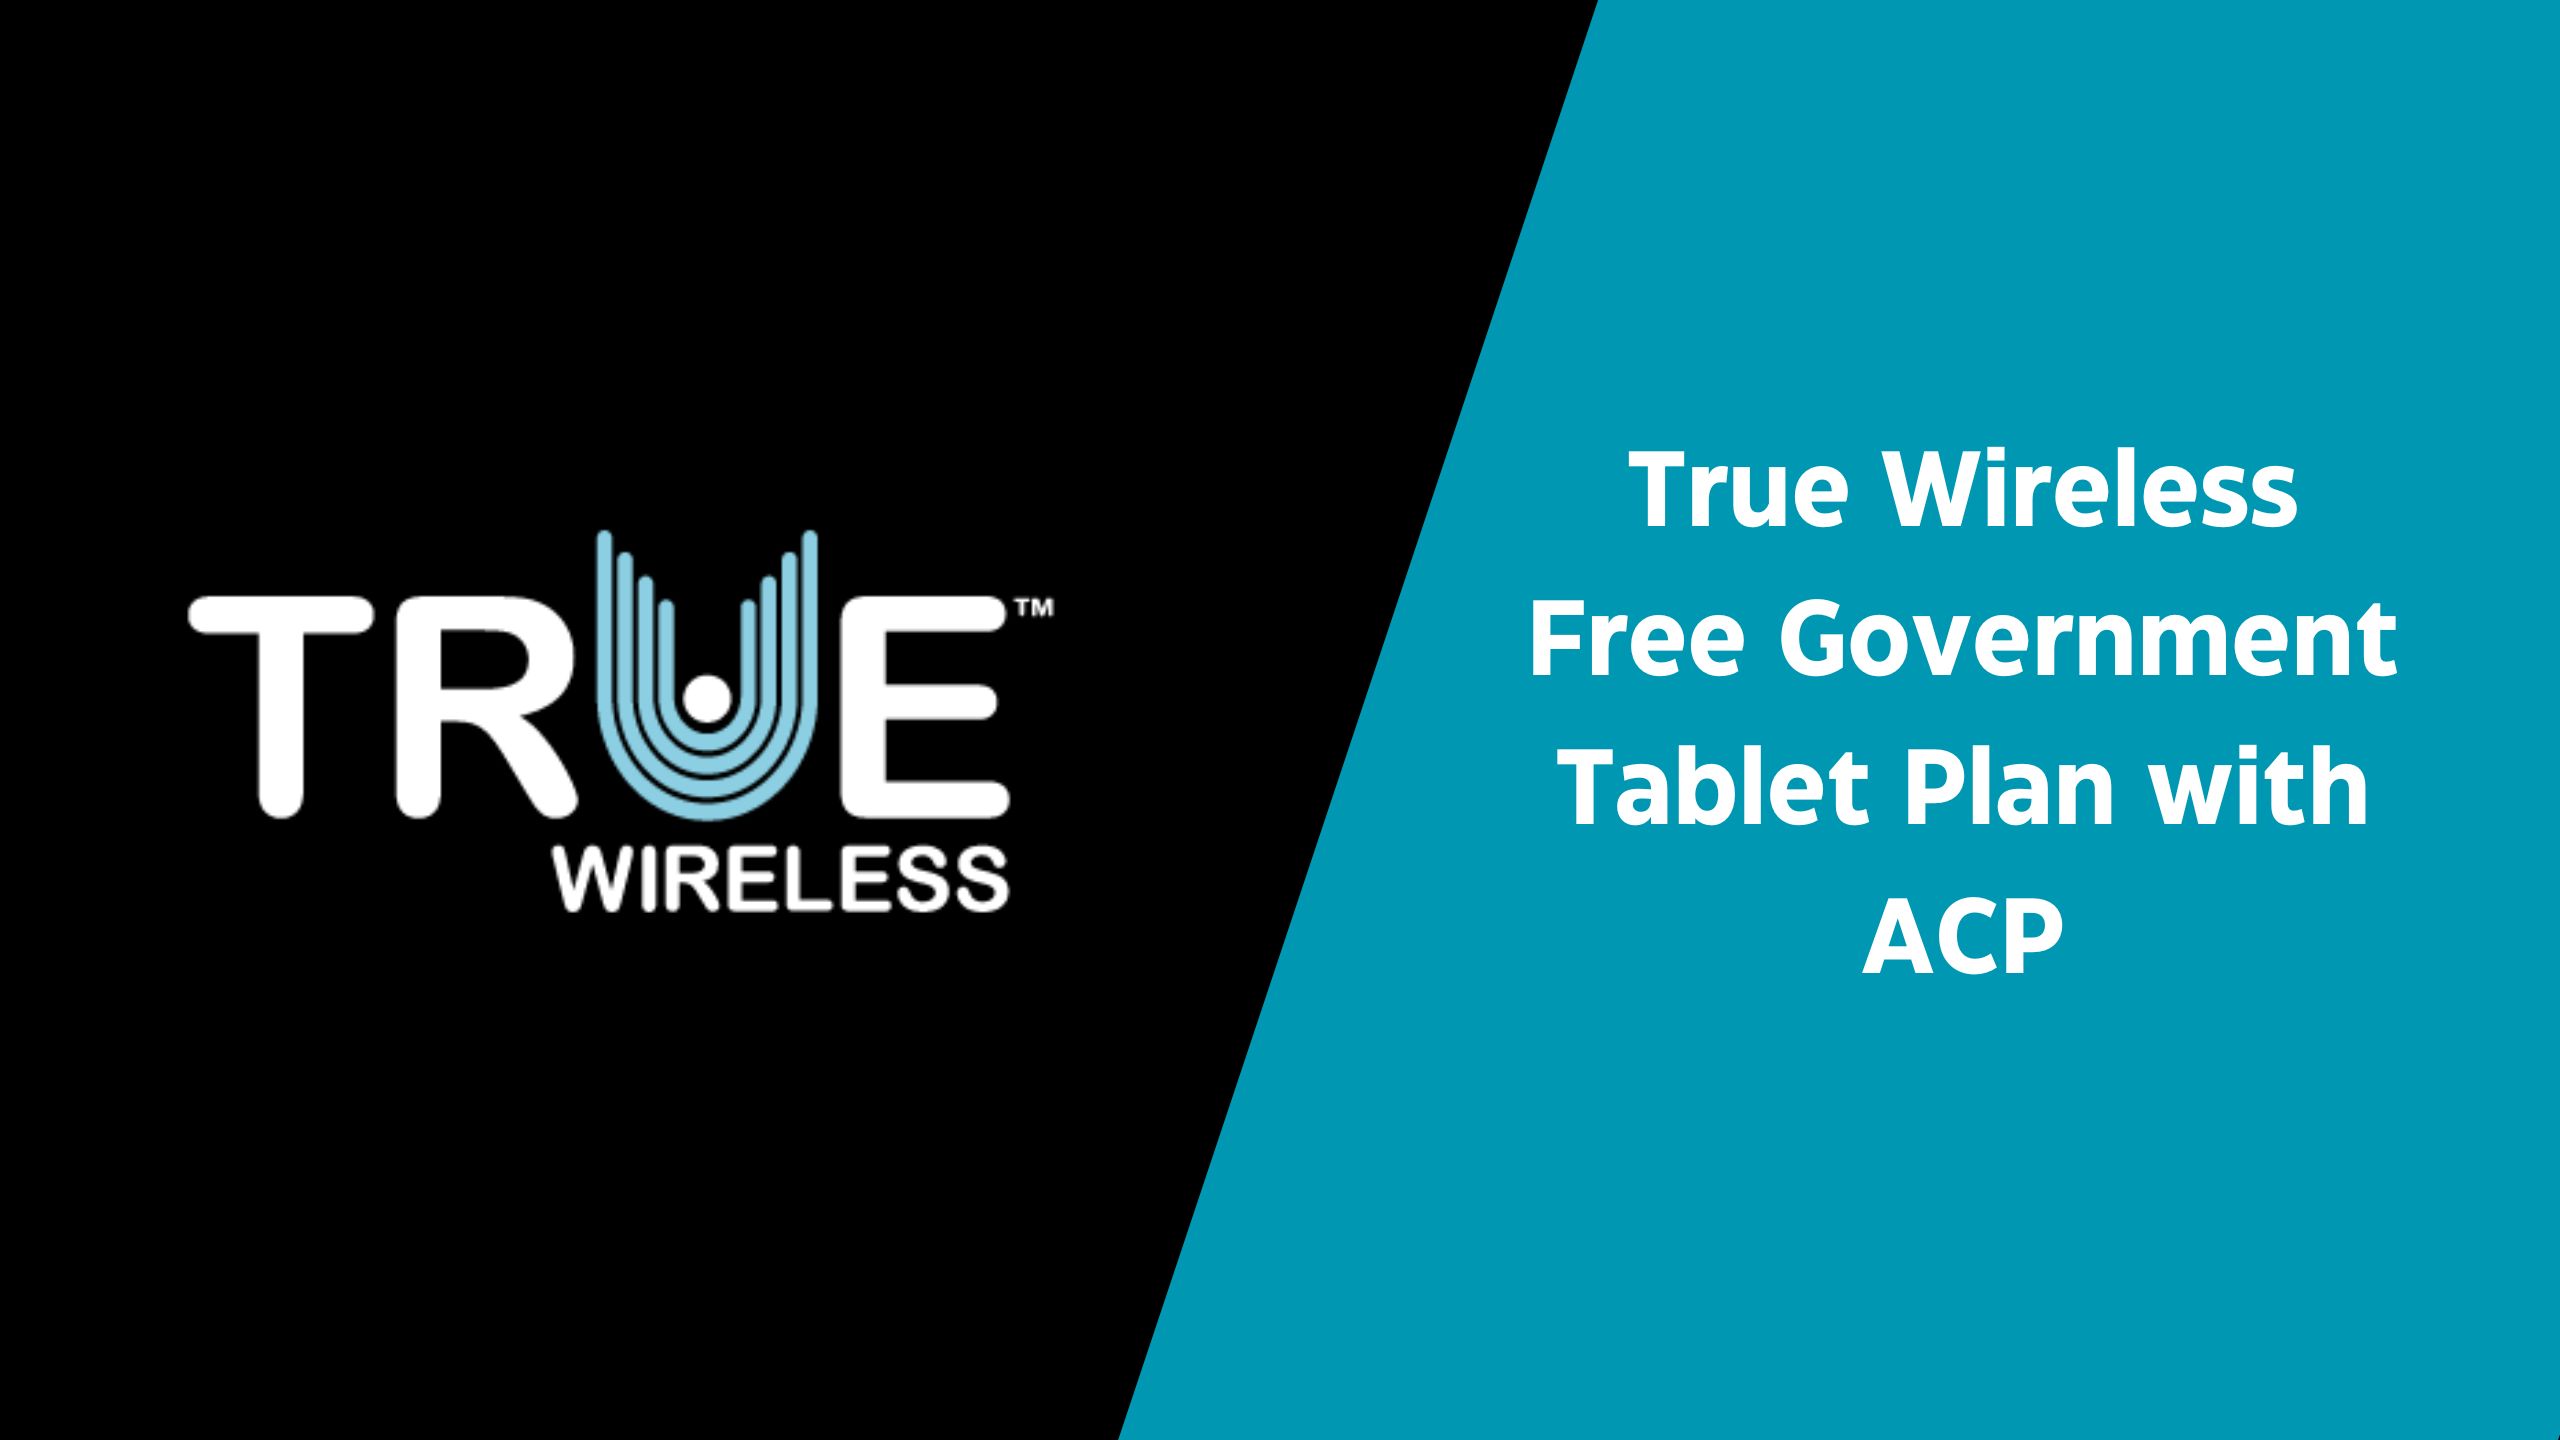 True Wireless Free Government Tablet Plan with ACP : Qualification & Application Guide